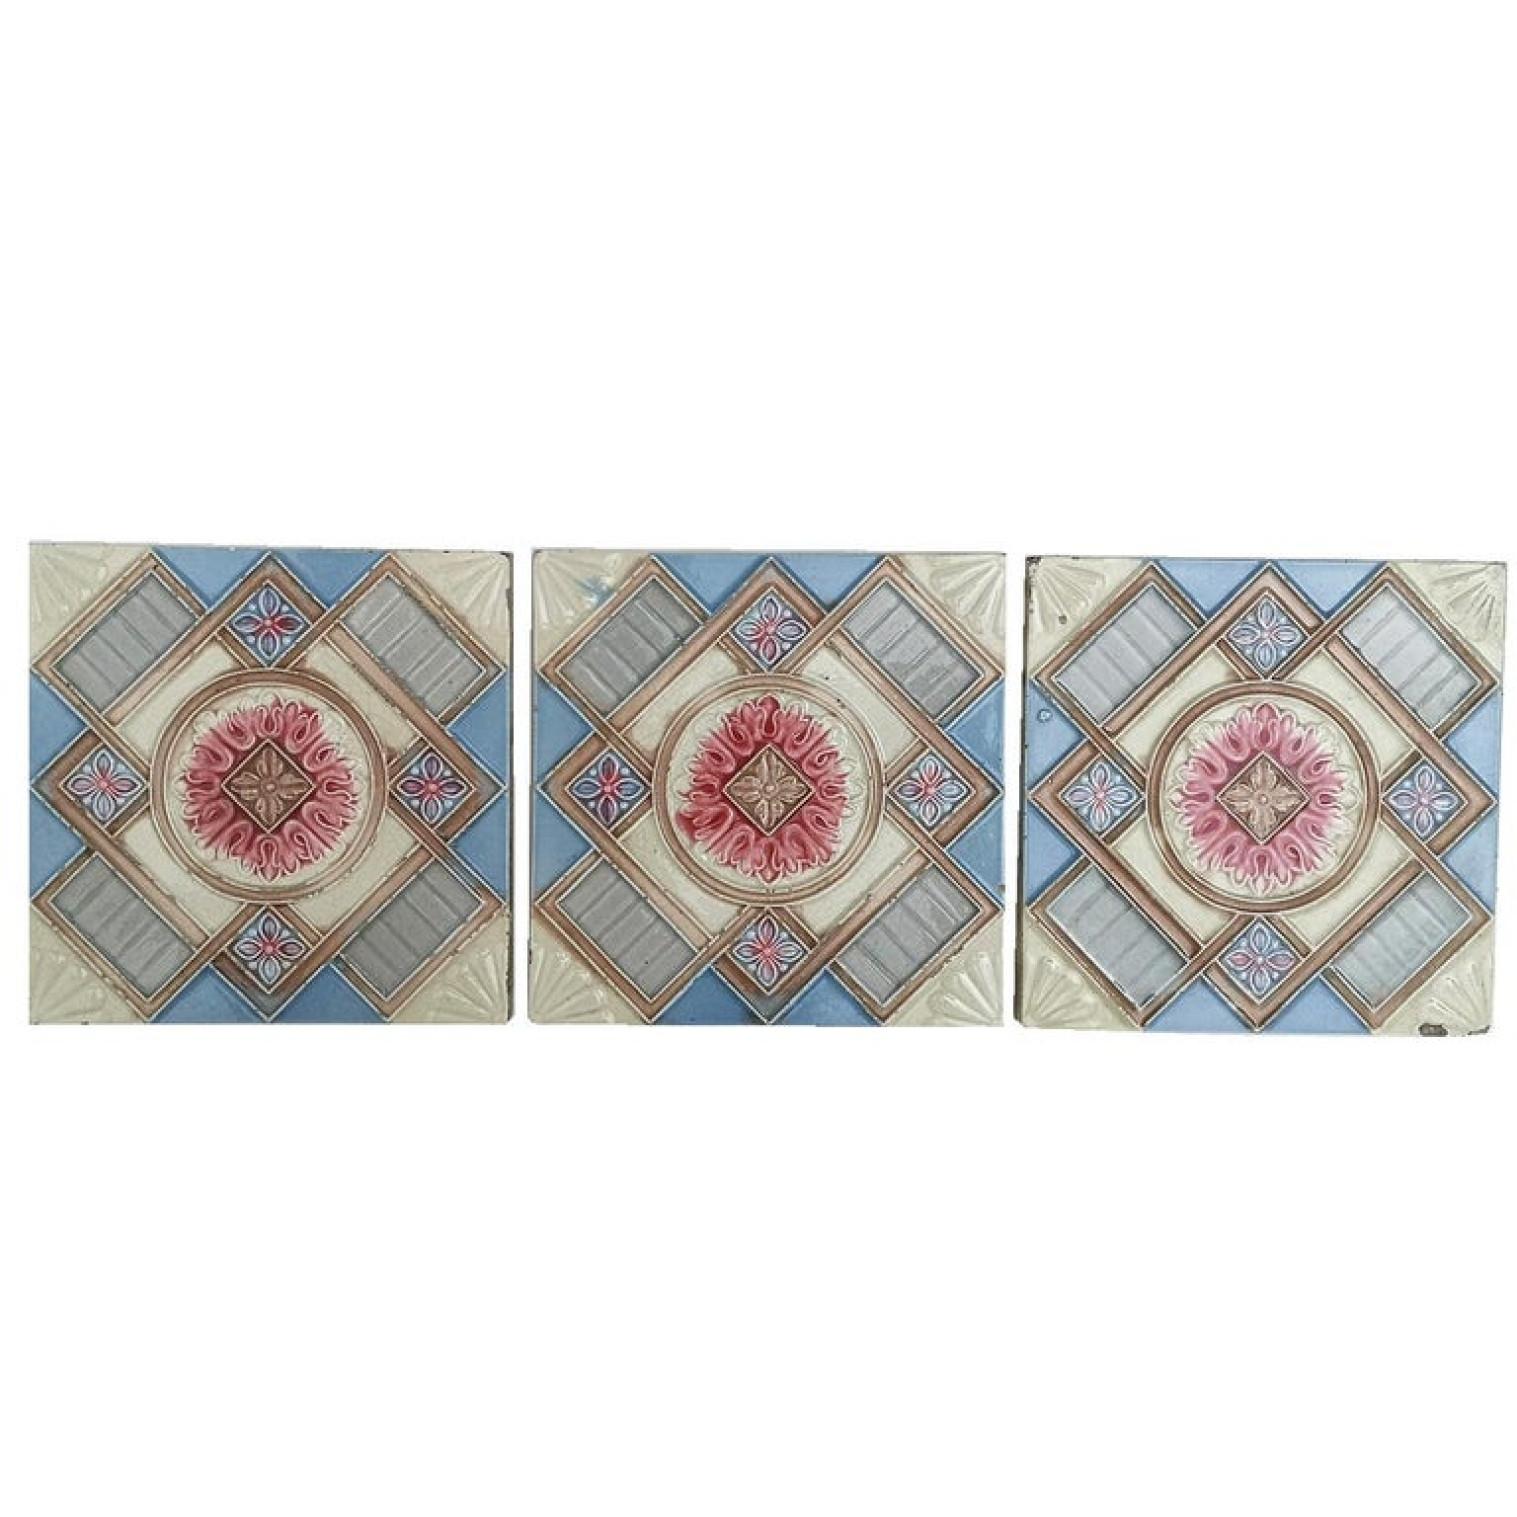 This is an amazing set of 14 antique Art Nouveau handmade tiles, S.A. Produits Céramiques de la Dyle in Wijgmaal, Belga).
A beautiful relief and deep rich warm creme, sky blue, and grey color. These tiles would be charming displayed on easels,